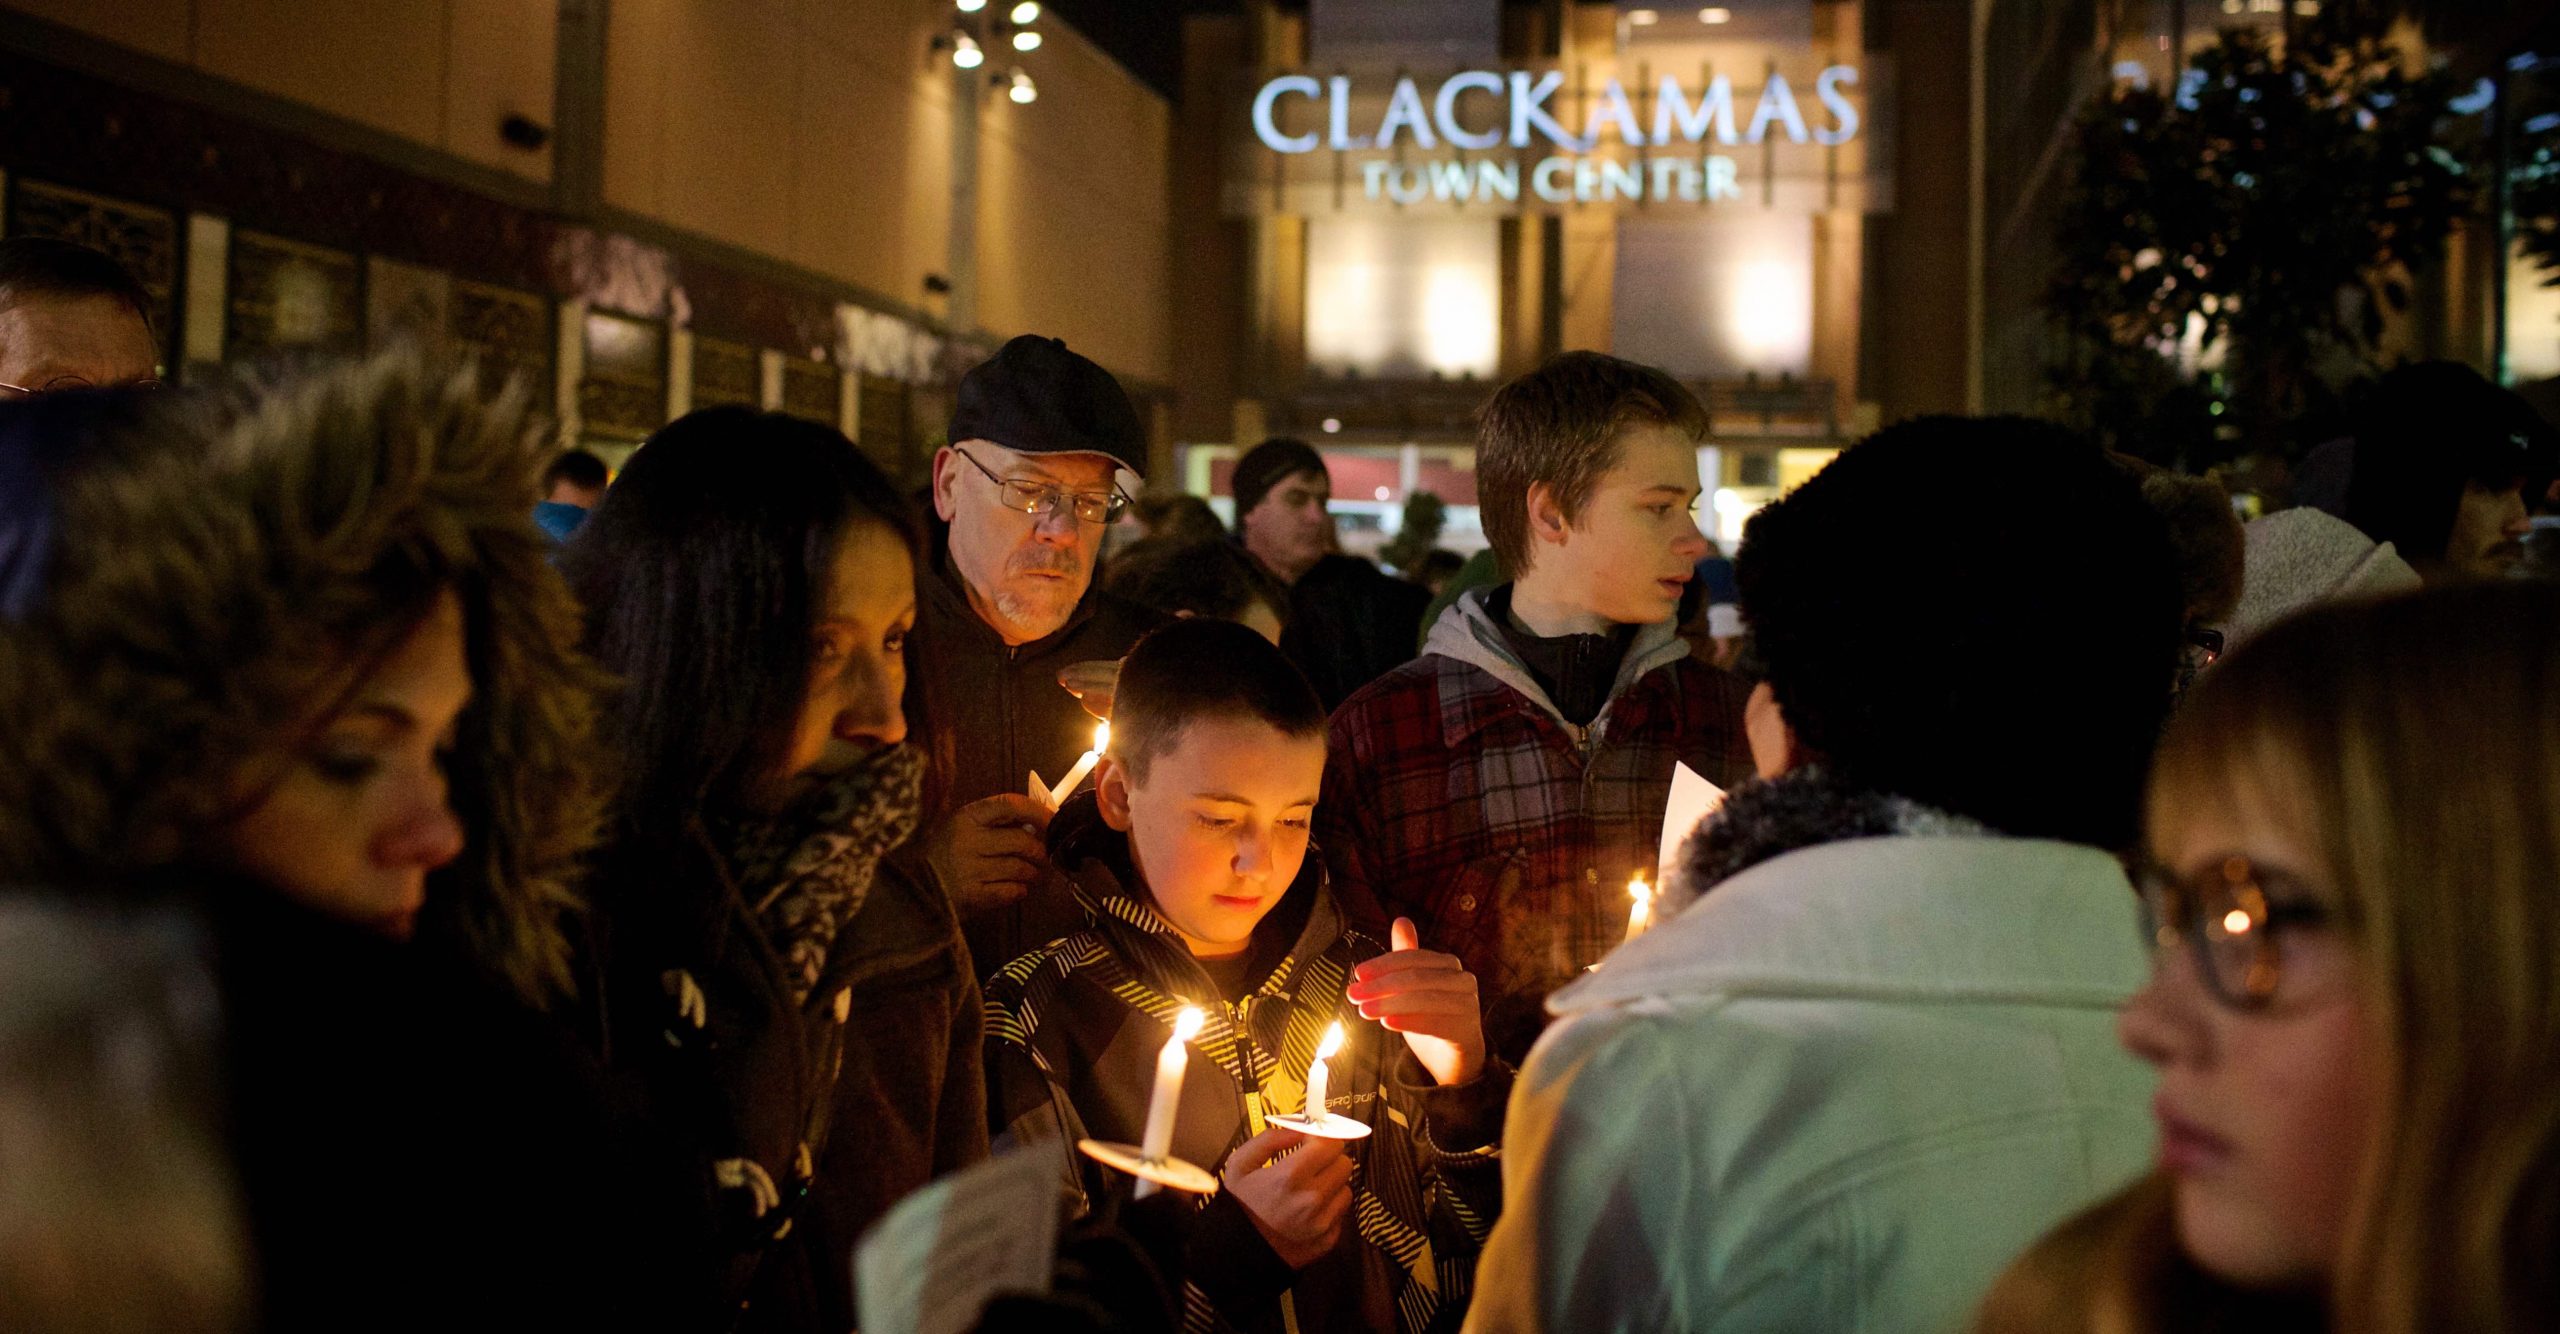 Shooter, victims at Clackamas Town Center identified